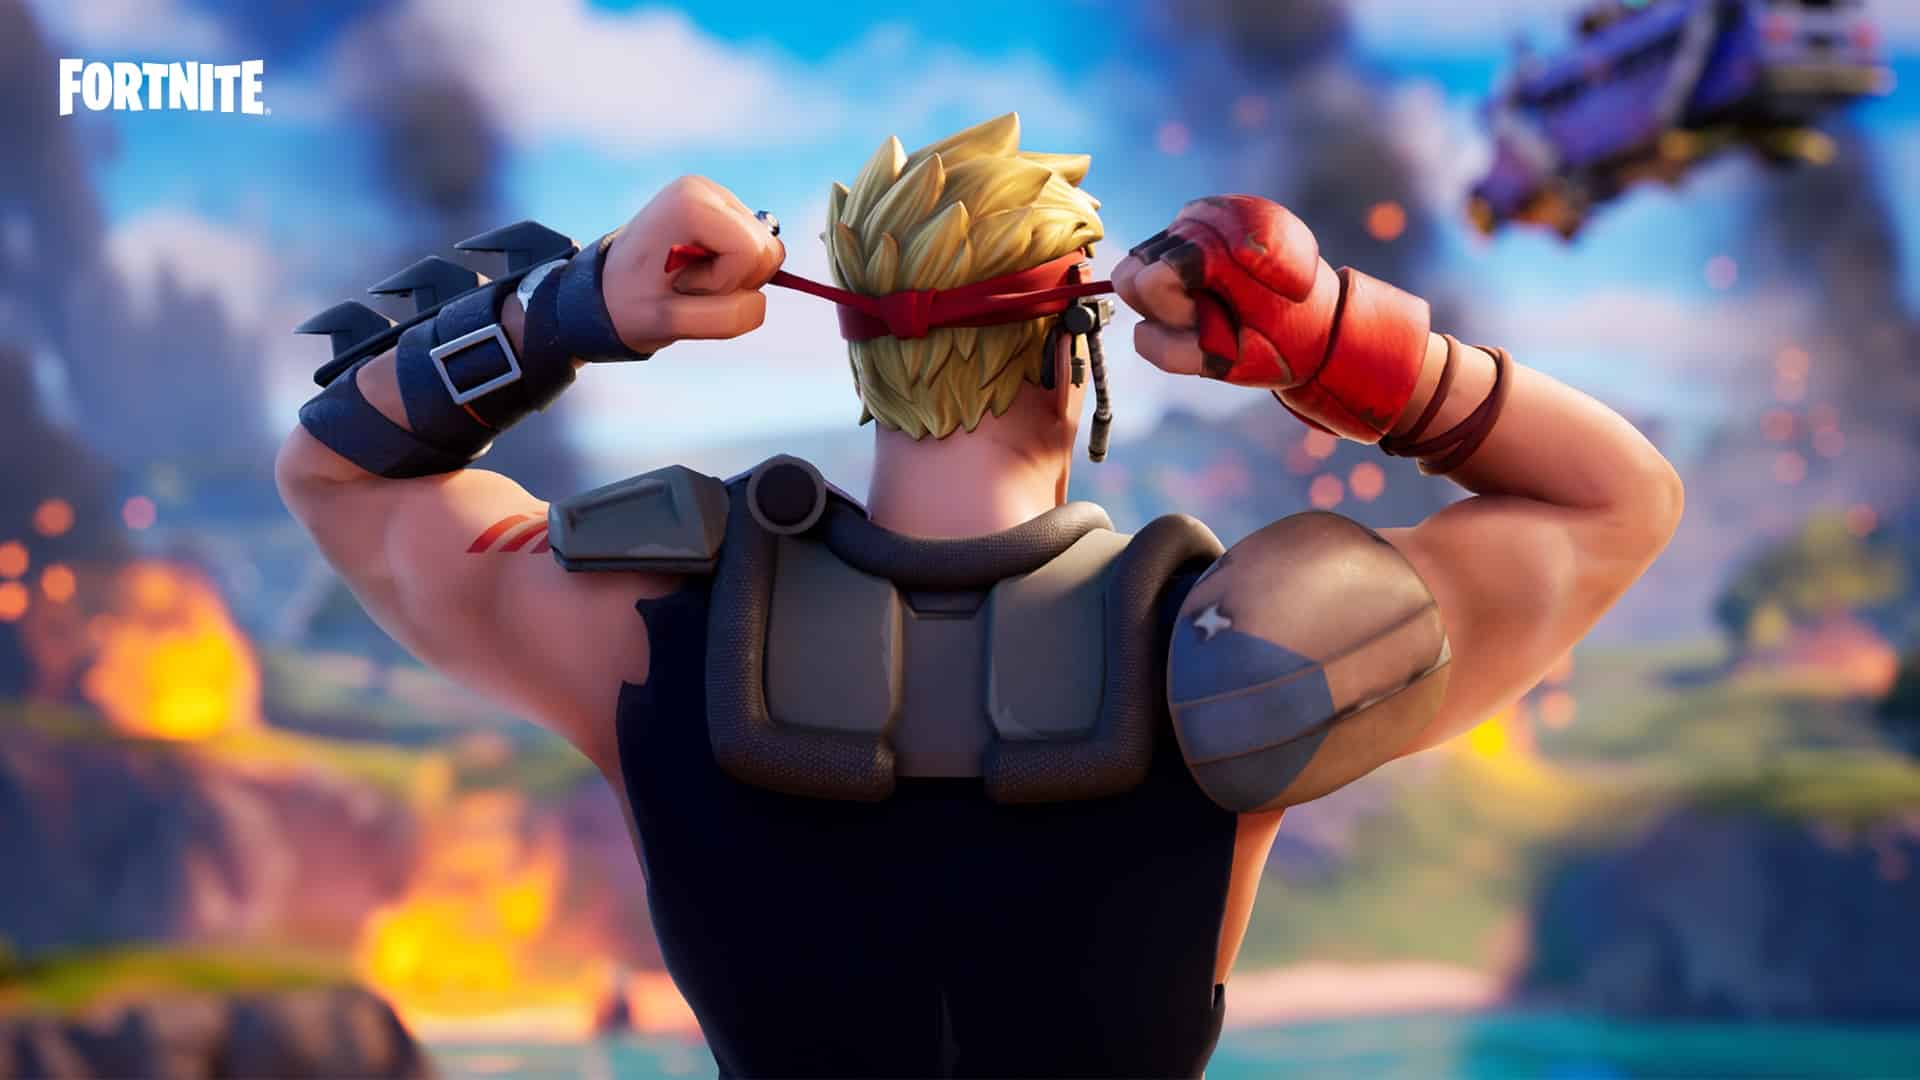 Fortnite Season 6 Teaser Reveals A New Gun That Might Be Coming To The Game